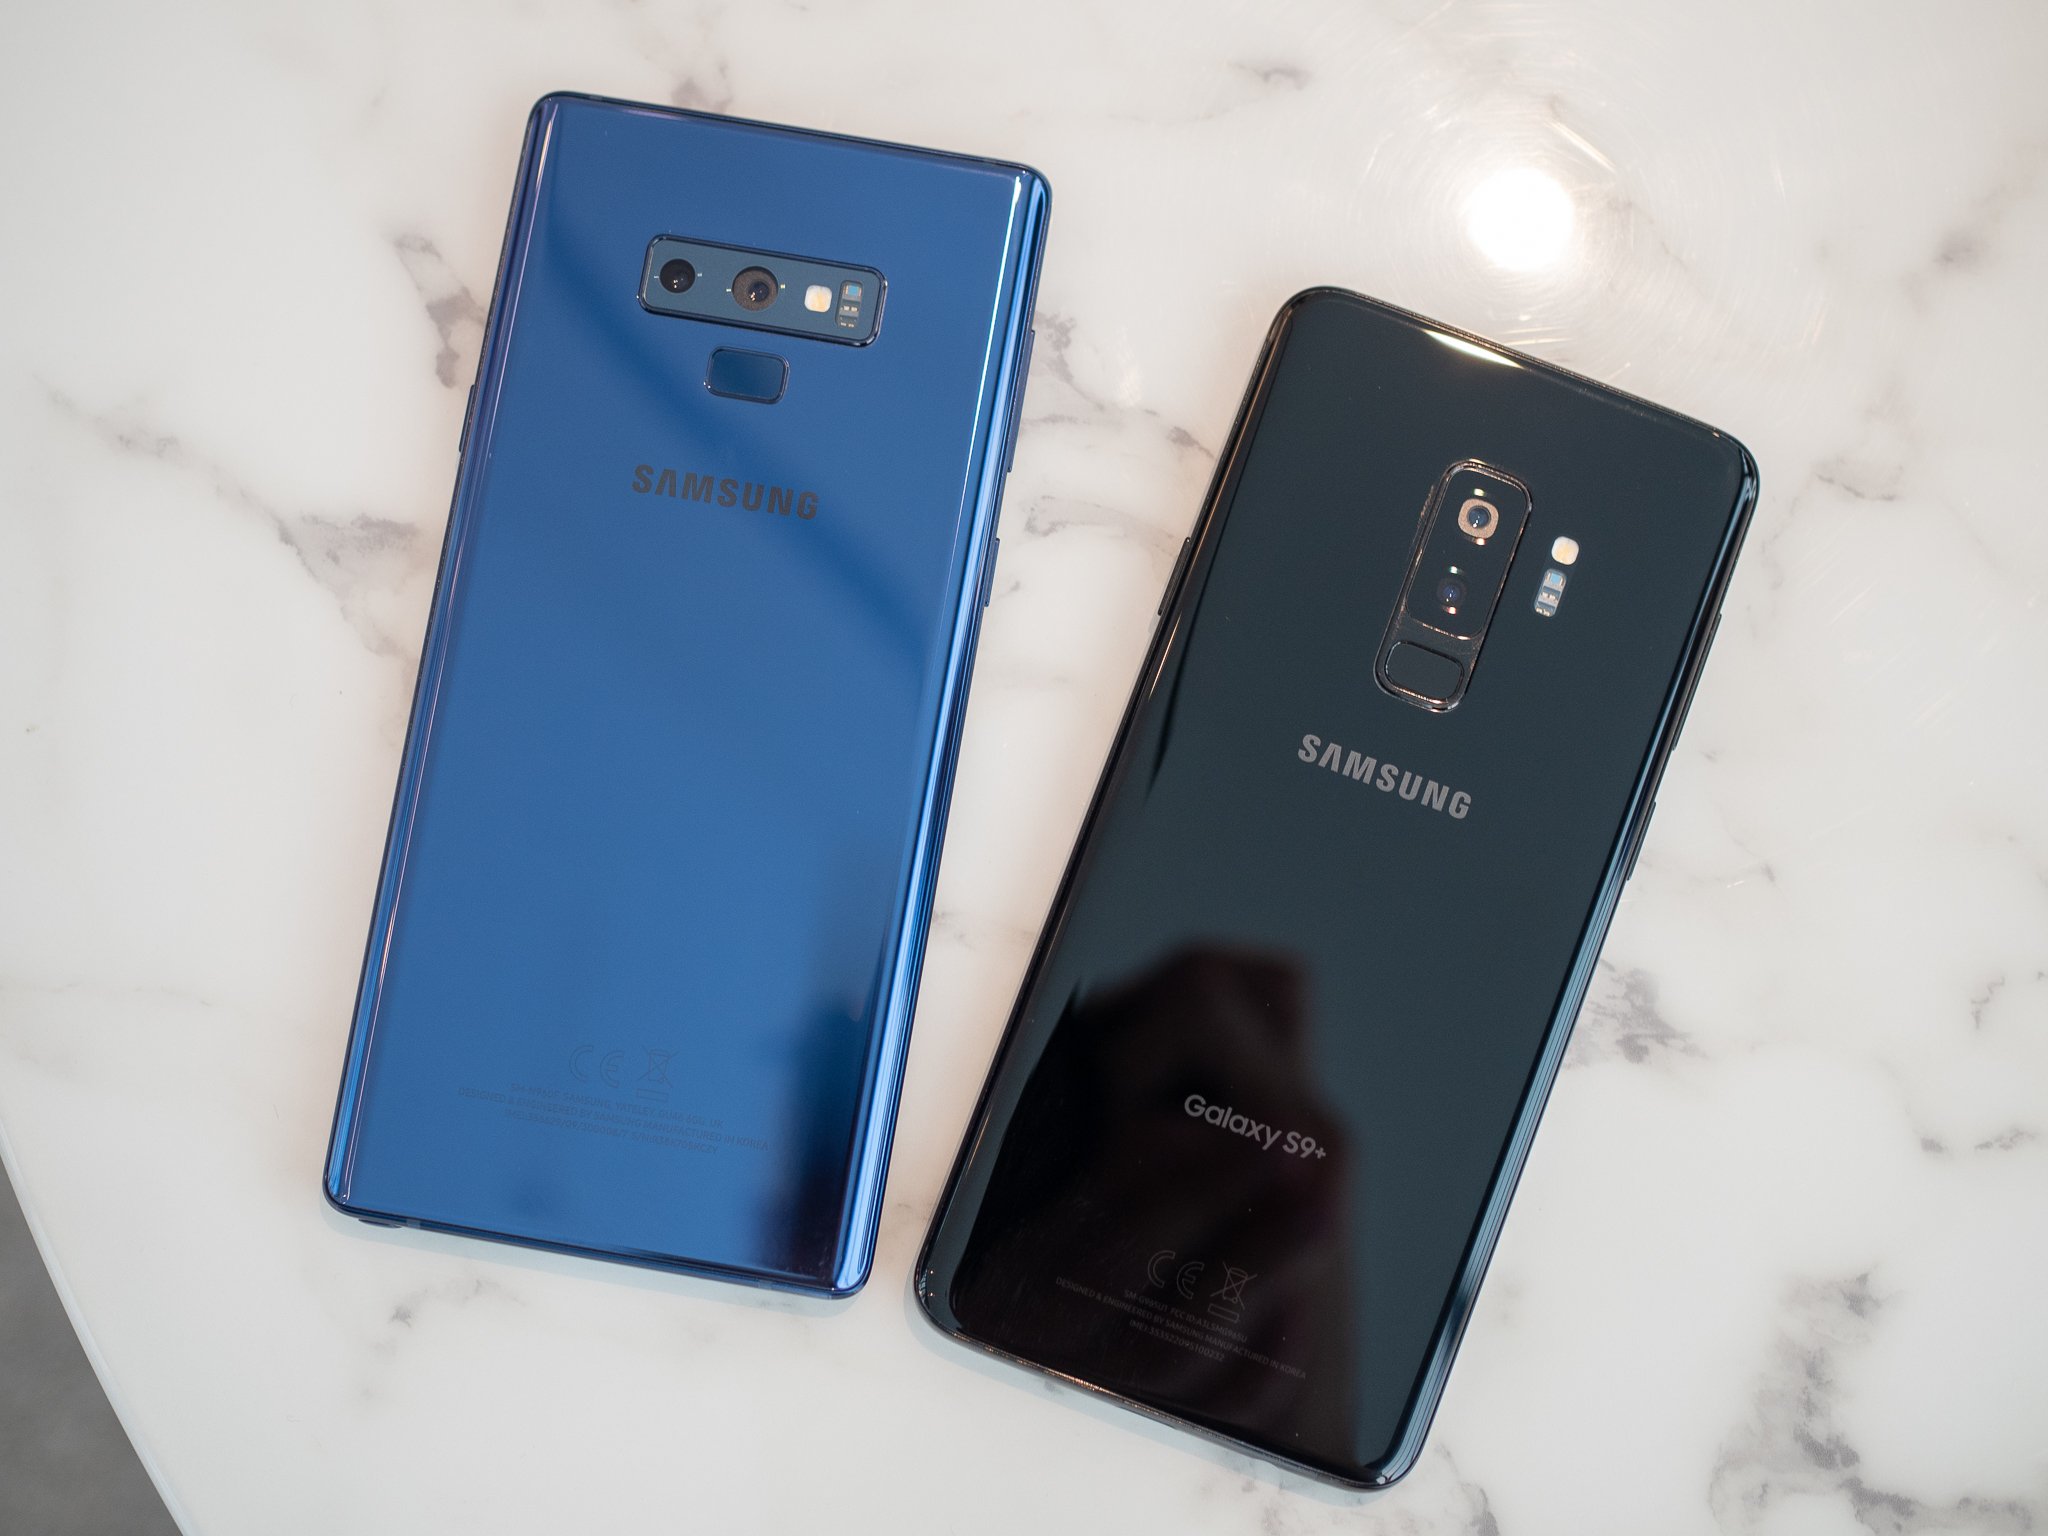 The difference between Galaxy S9 and S9+